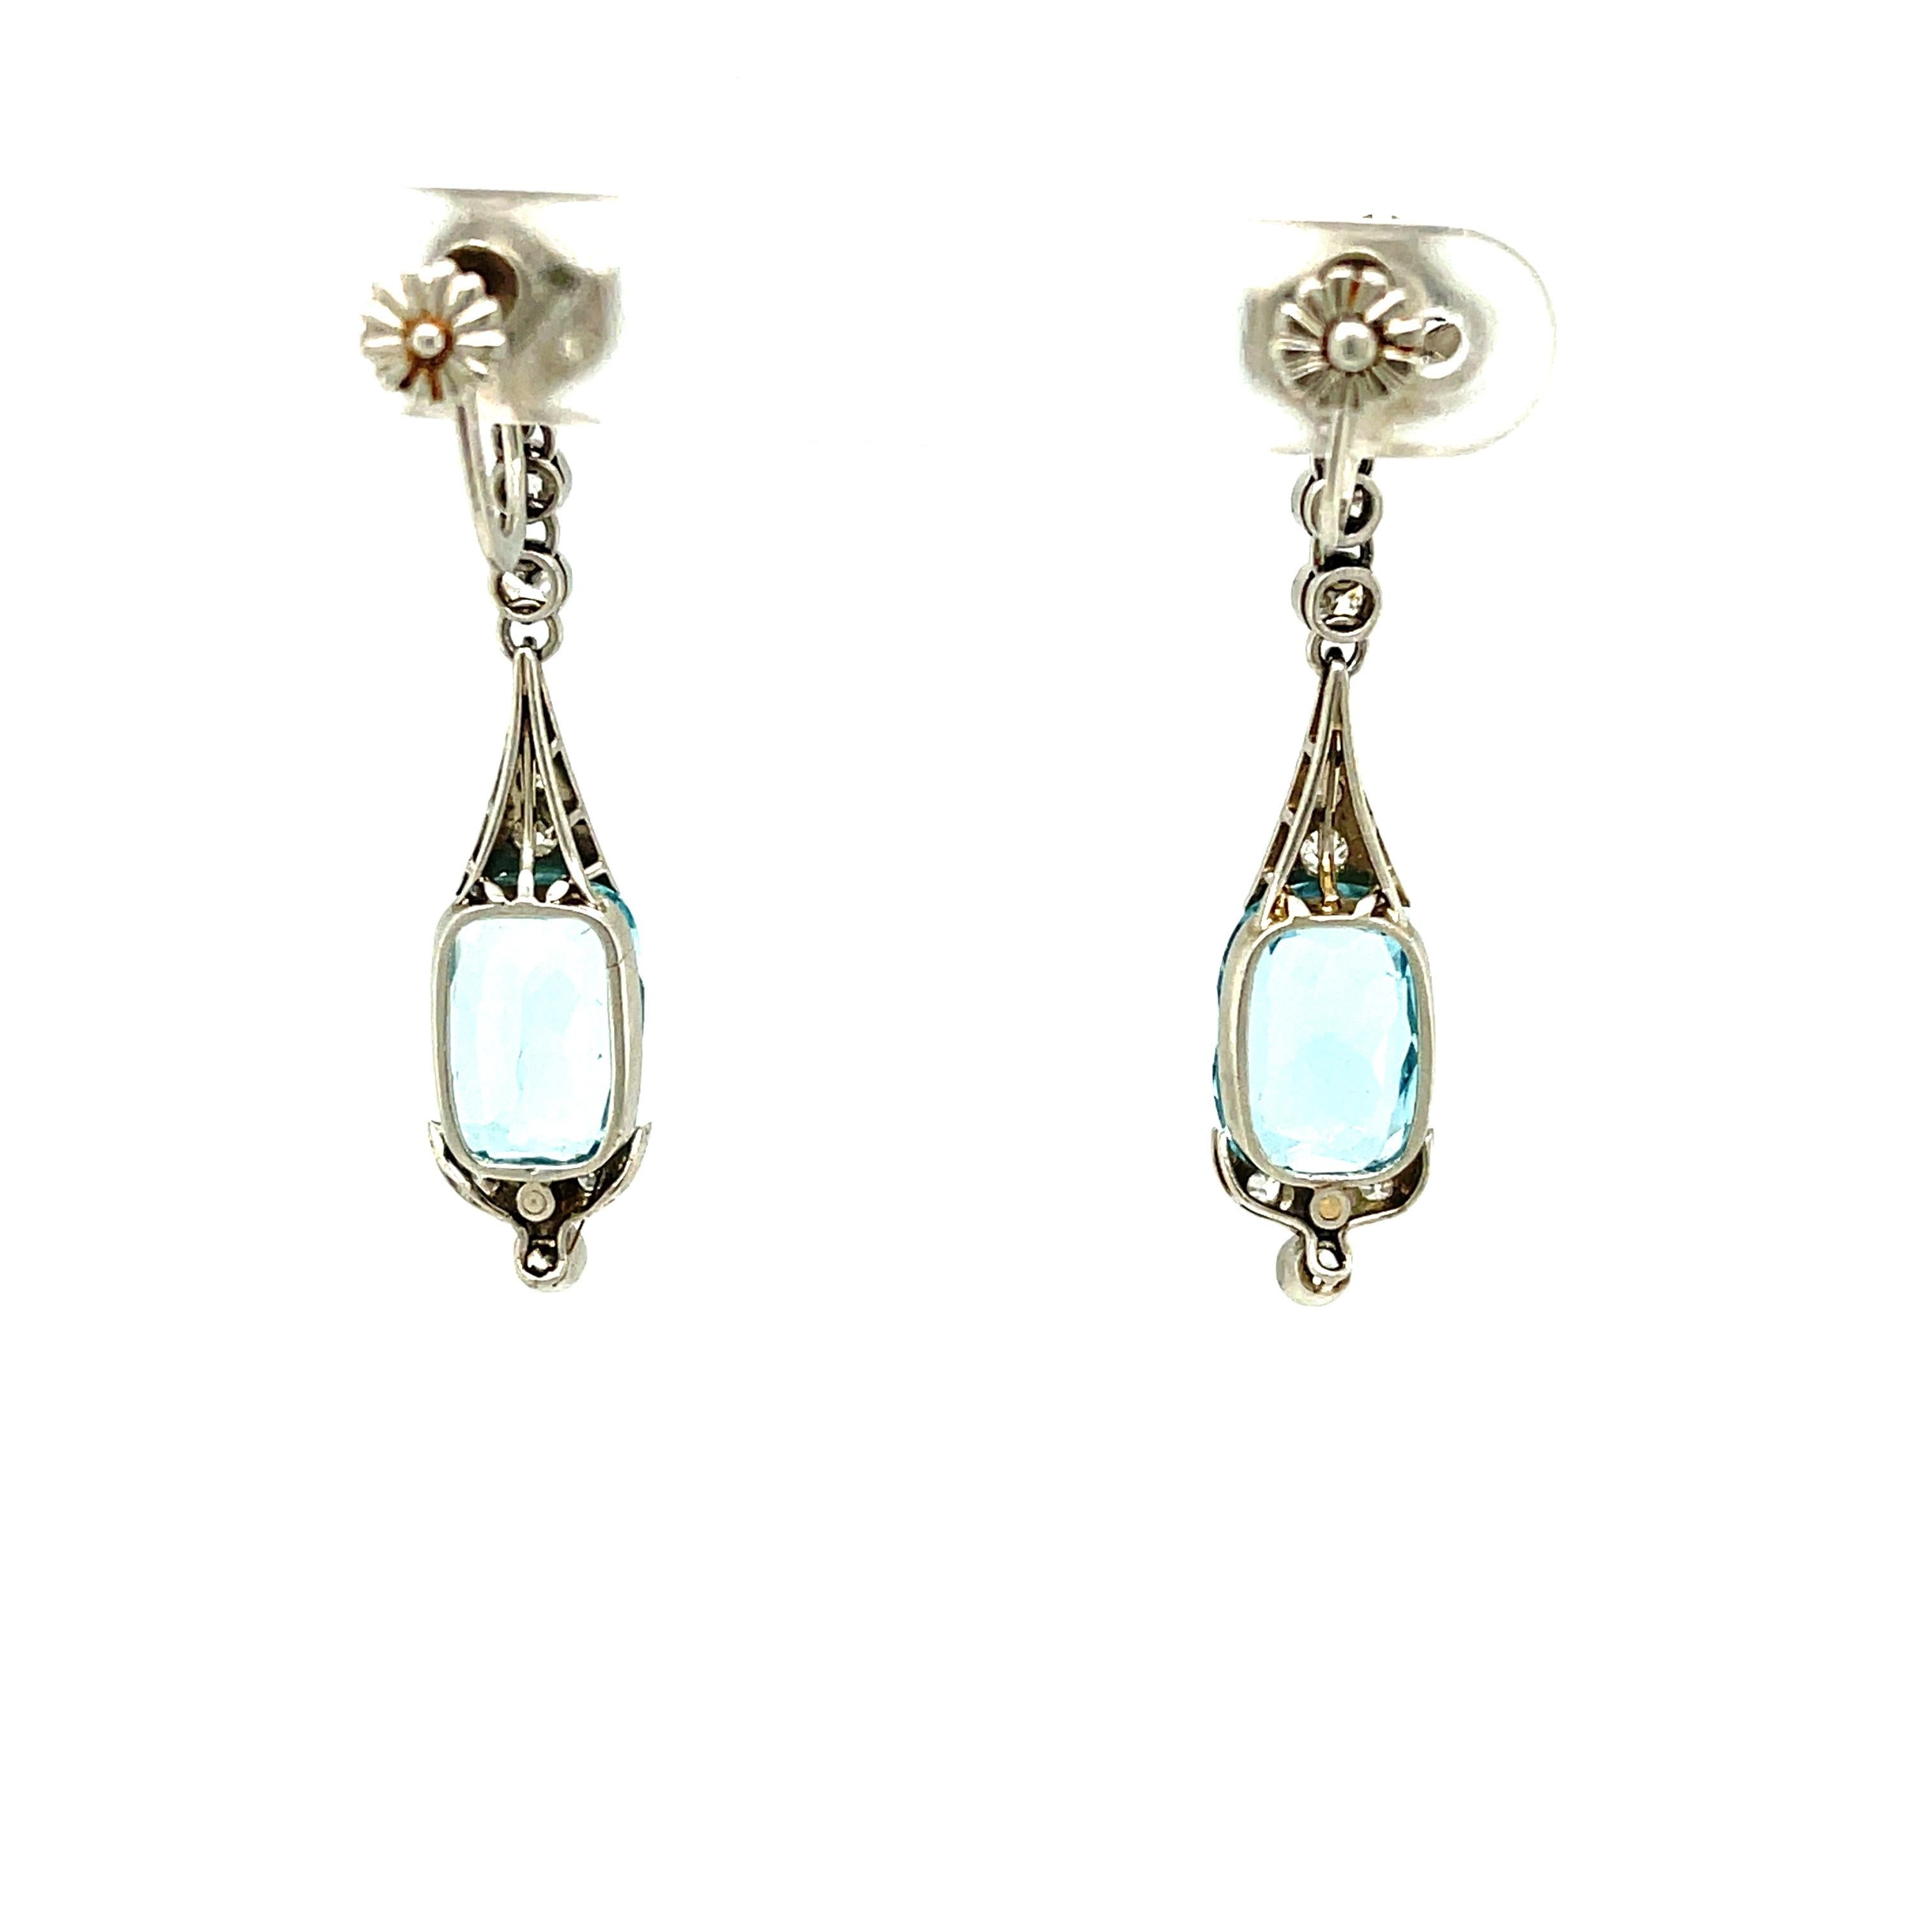 A rare pair of Art Deco platinum diamond aquamarine earrings, circa 1920. This pair of earrings is a lovely pendant earring suspending a faceted aquamarine. Such an earring is a rarity to find these days. The earrings are screw back, perhaps a later